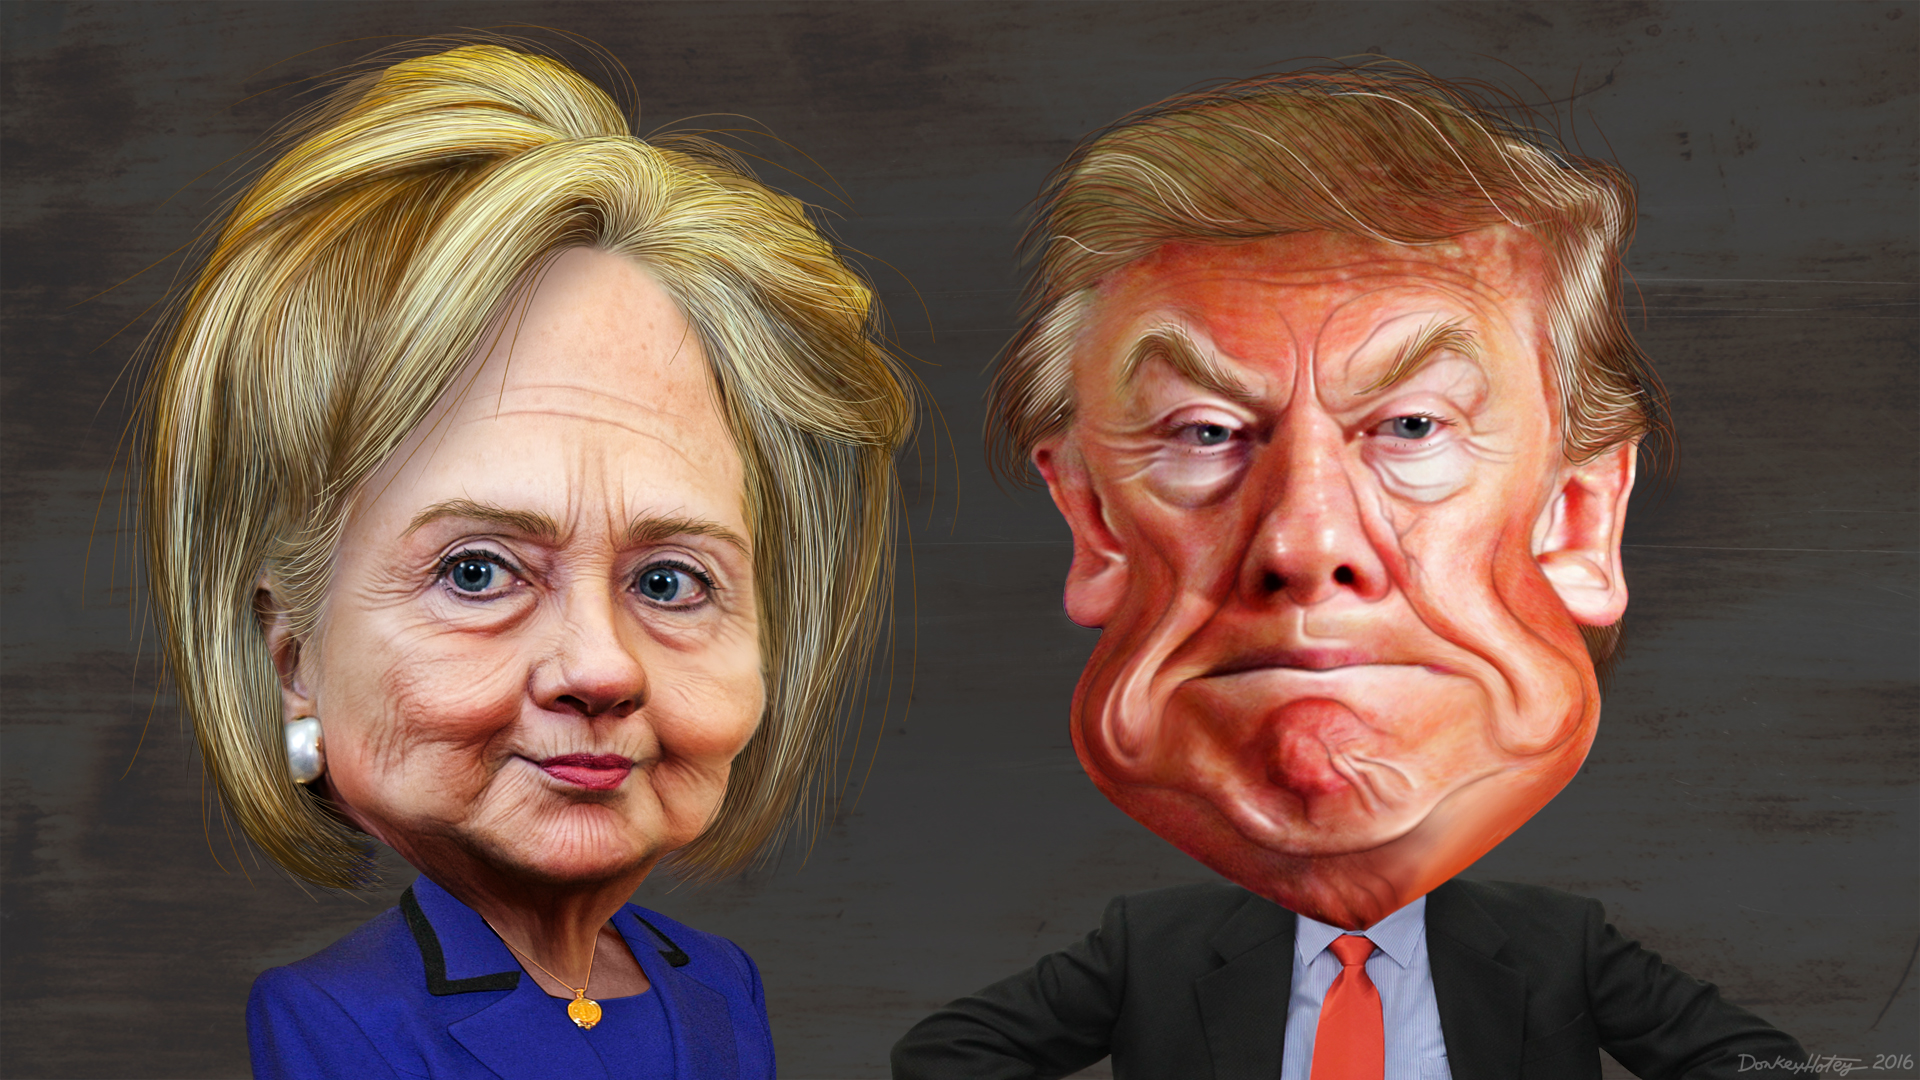 Donald Trump and Hillary Clinton Facebook Strategy